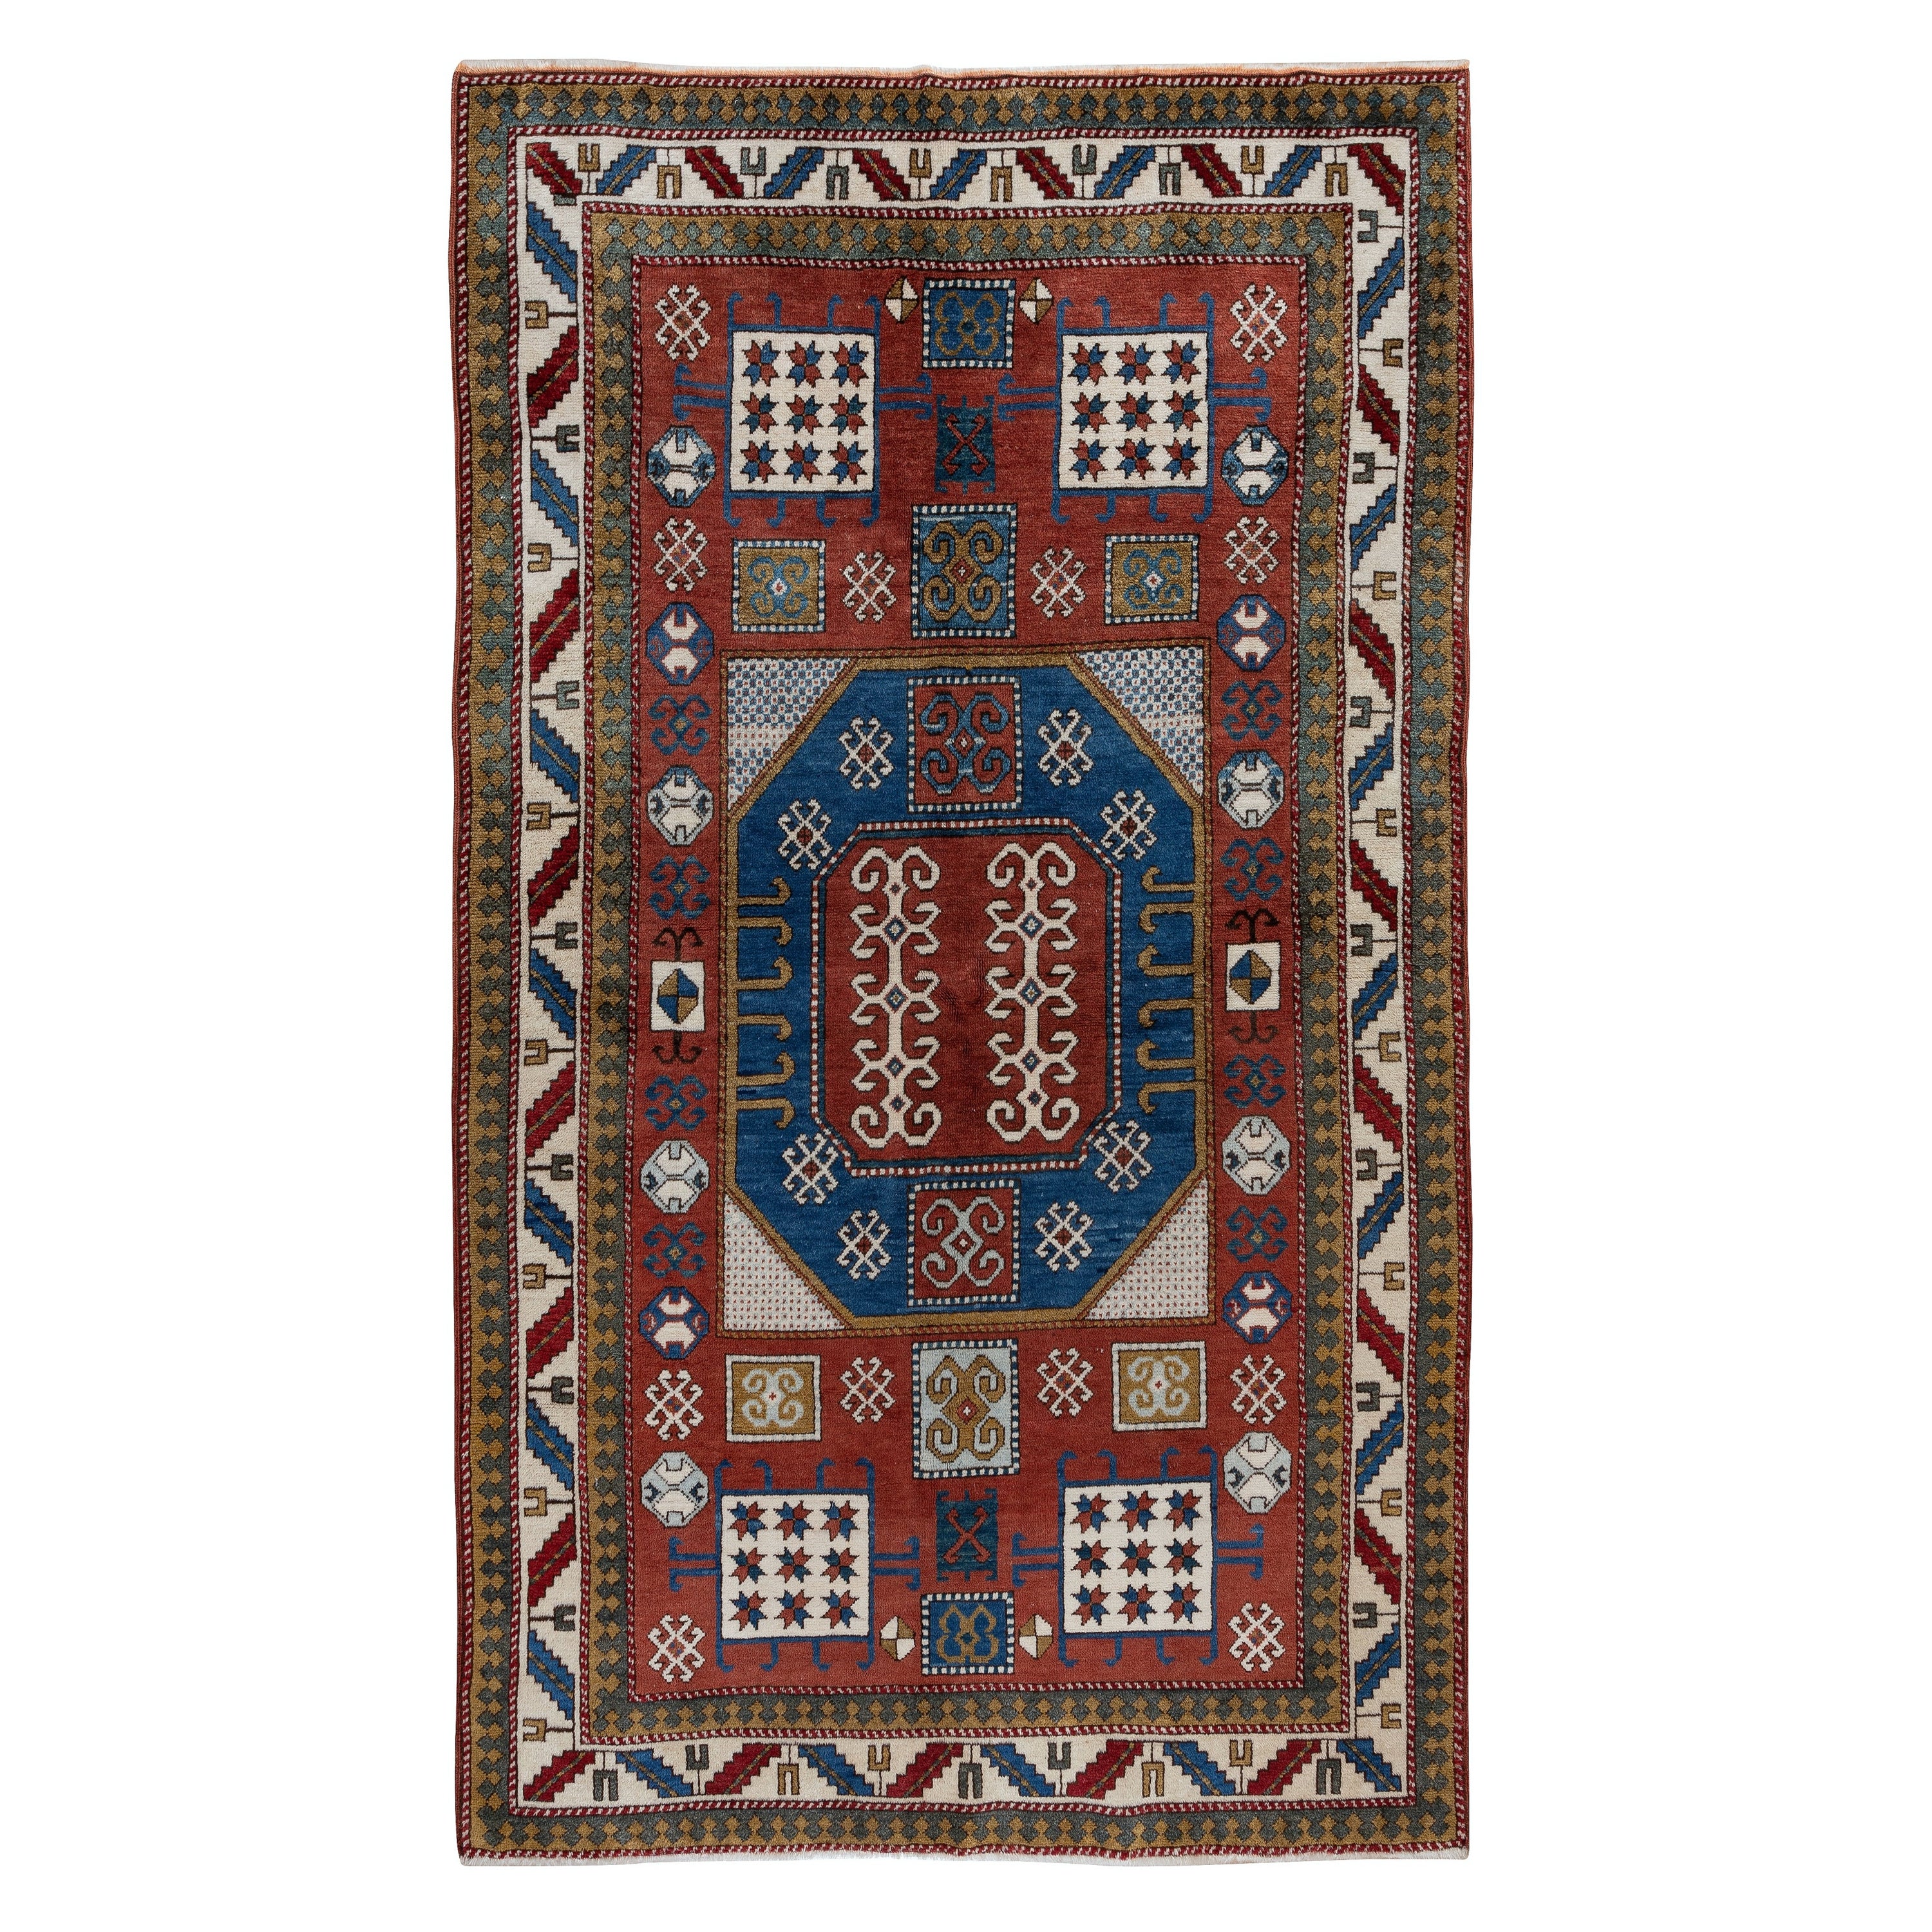 4.6x8 Ft Brand-new Hand-Knotted Caucasian Kazak Area Rug, All Wool For Sale